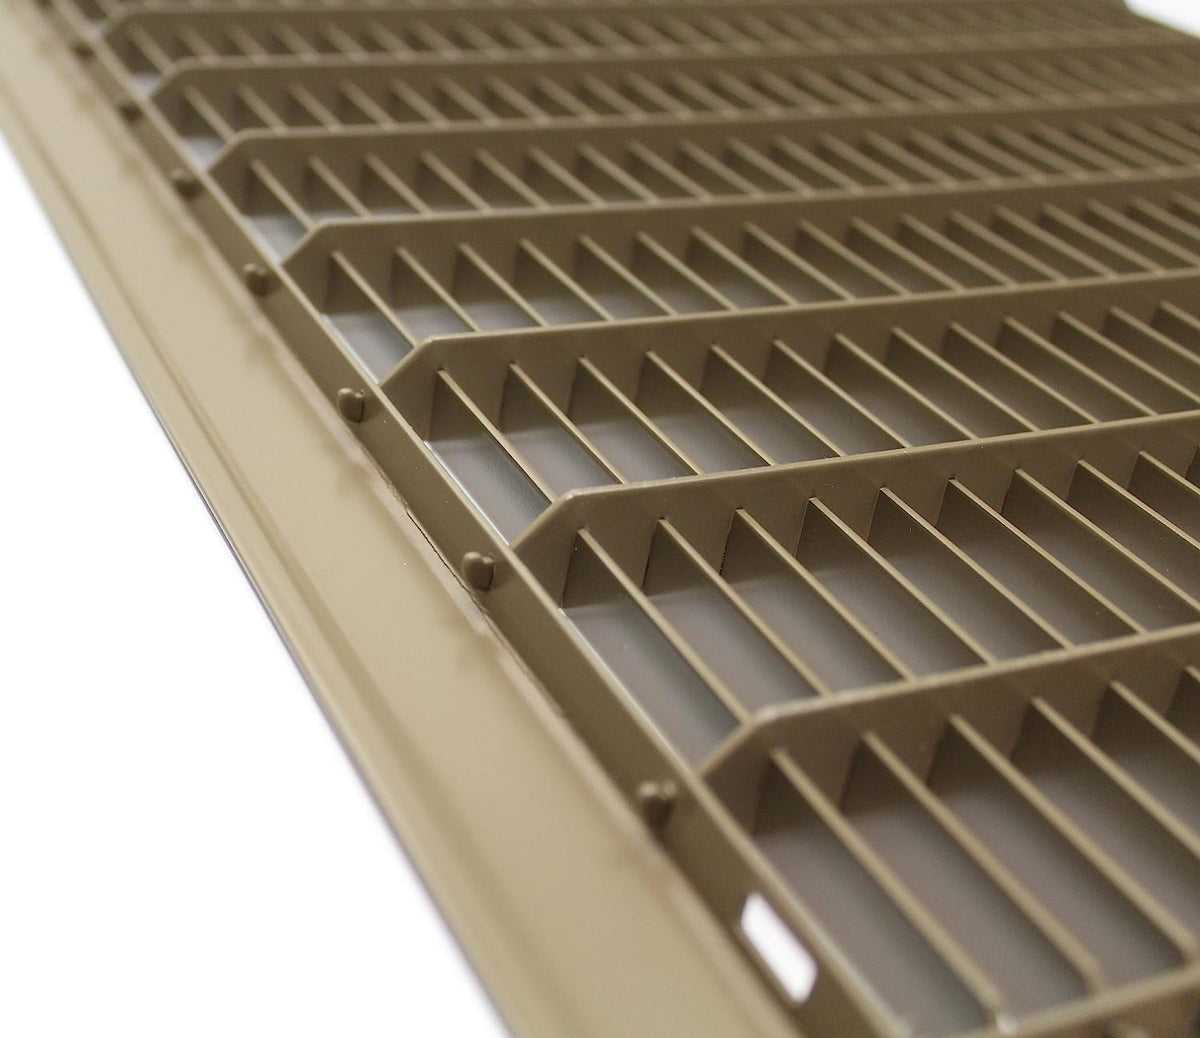 6&quot; X 12&quot; or 12&quot; X 6&quot; Heavy Duty Floor Grille - Fixed Blades Air Grille - Brown [Outer Dimensions: 7.75 X 13.75]